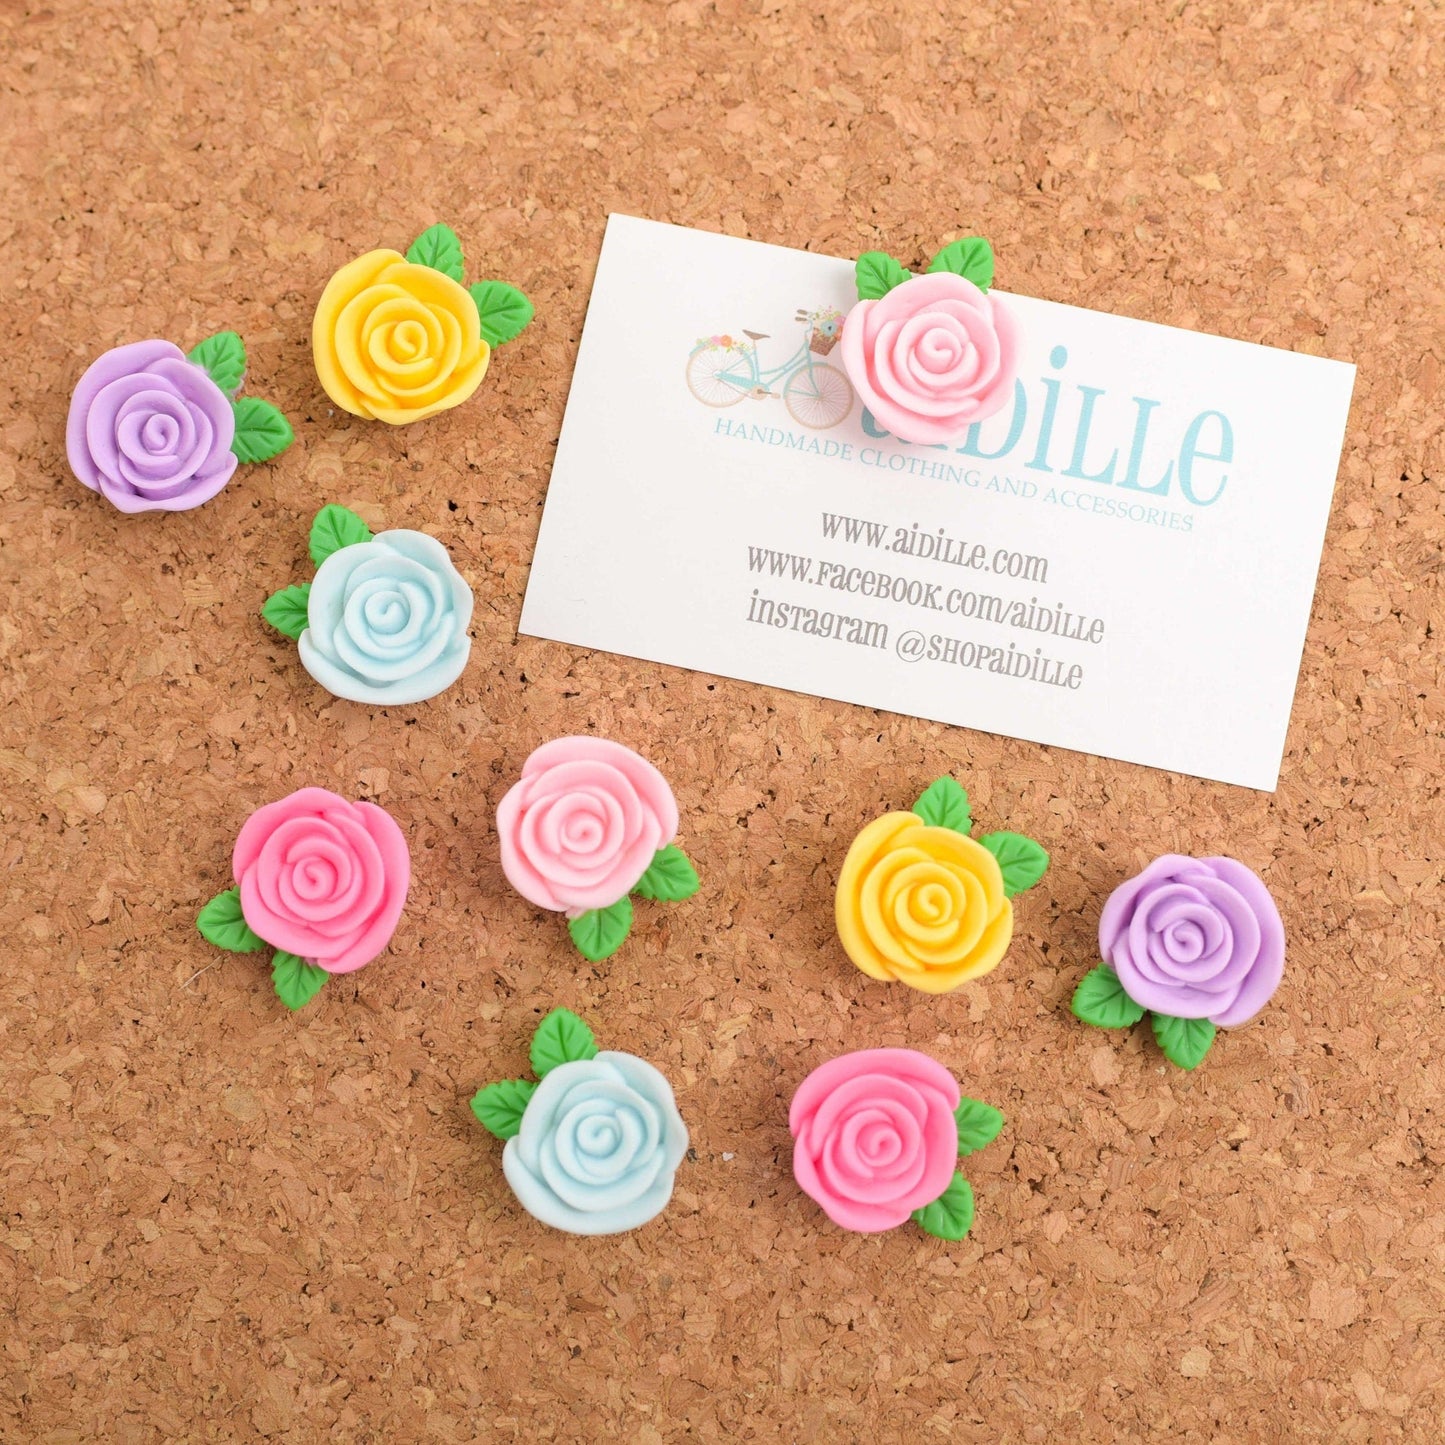 Pretty Rose Magnets or Push Pins in Assorted Pastel Colors